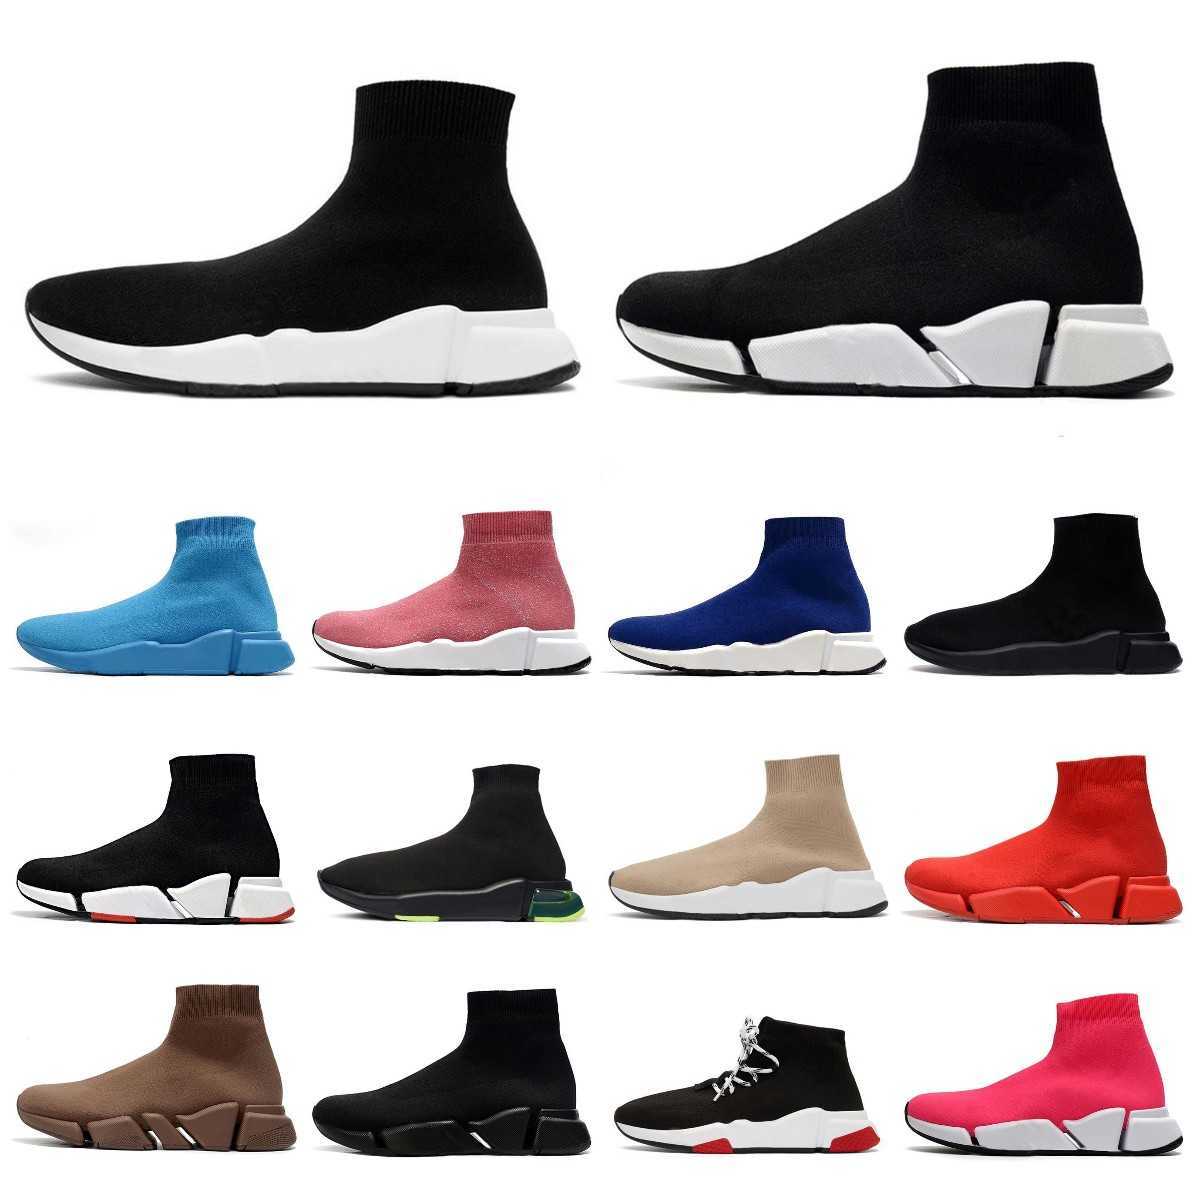 

Lace-Up Sports Trainers Trainer Casual Shoes Runners Sneakers Socks Boots Knit Shoes Luxury Paris Nude Glitter Graffiti Fashion Er Sock, D38 lace-up black white